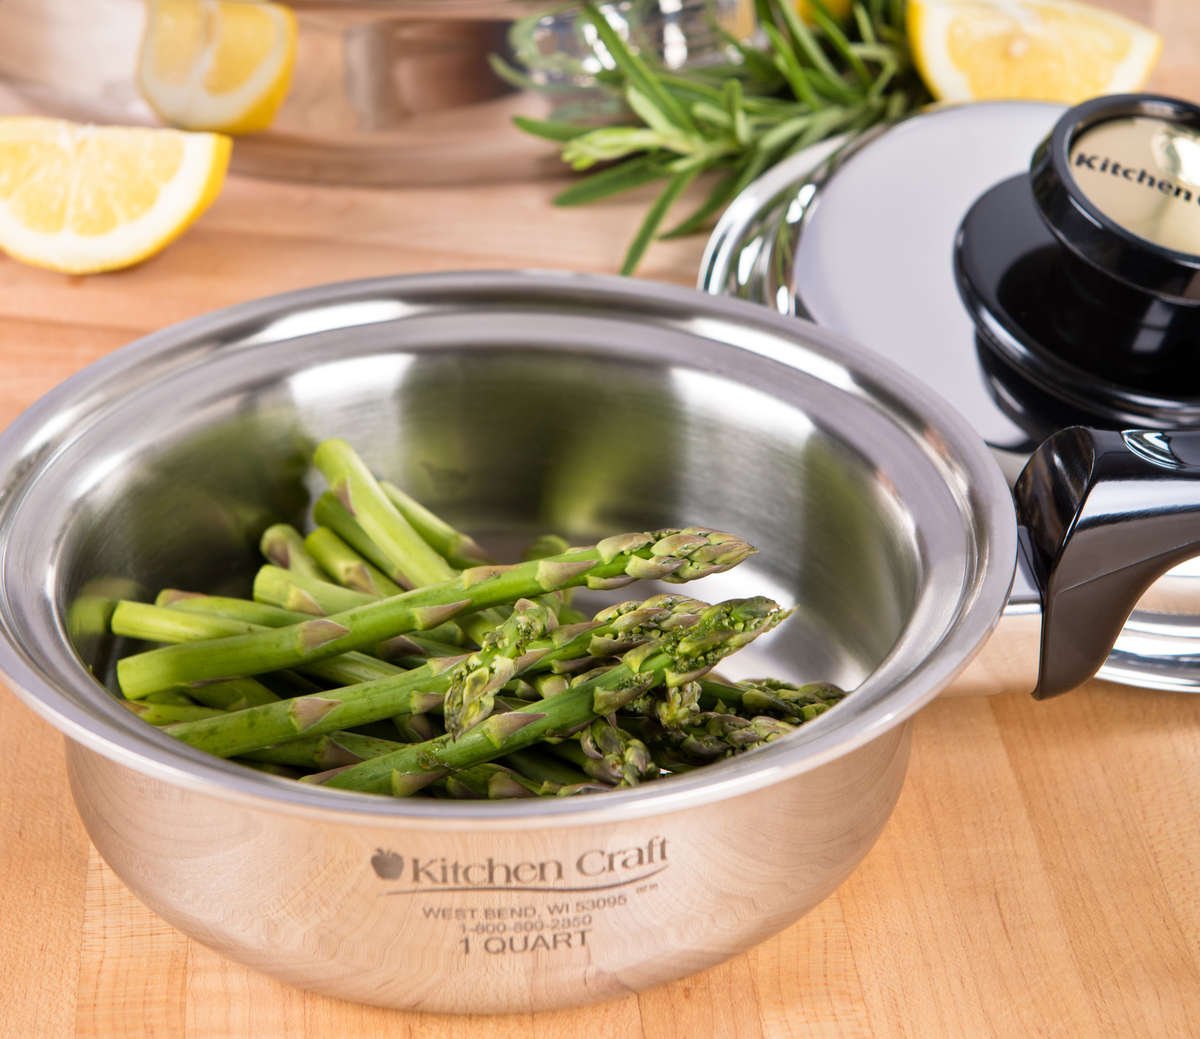 316TI Stainless Steel Cookware